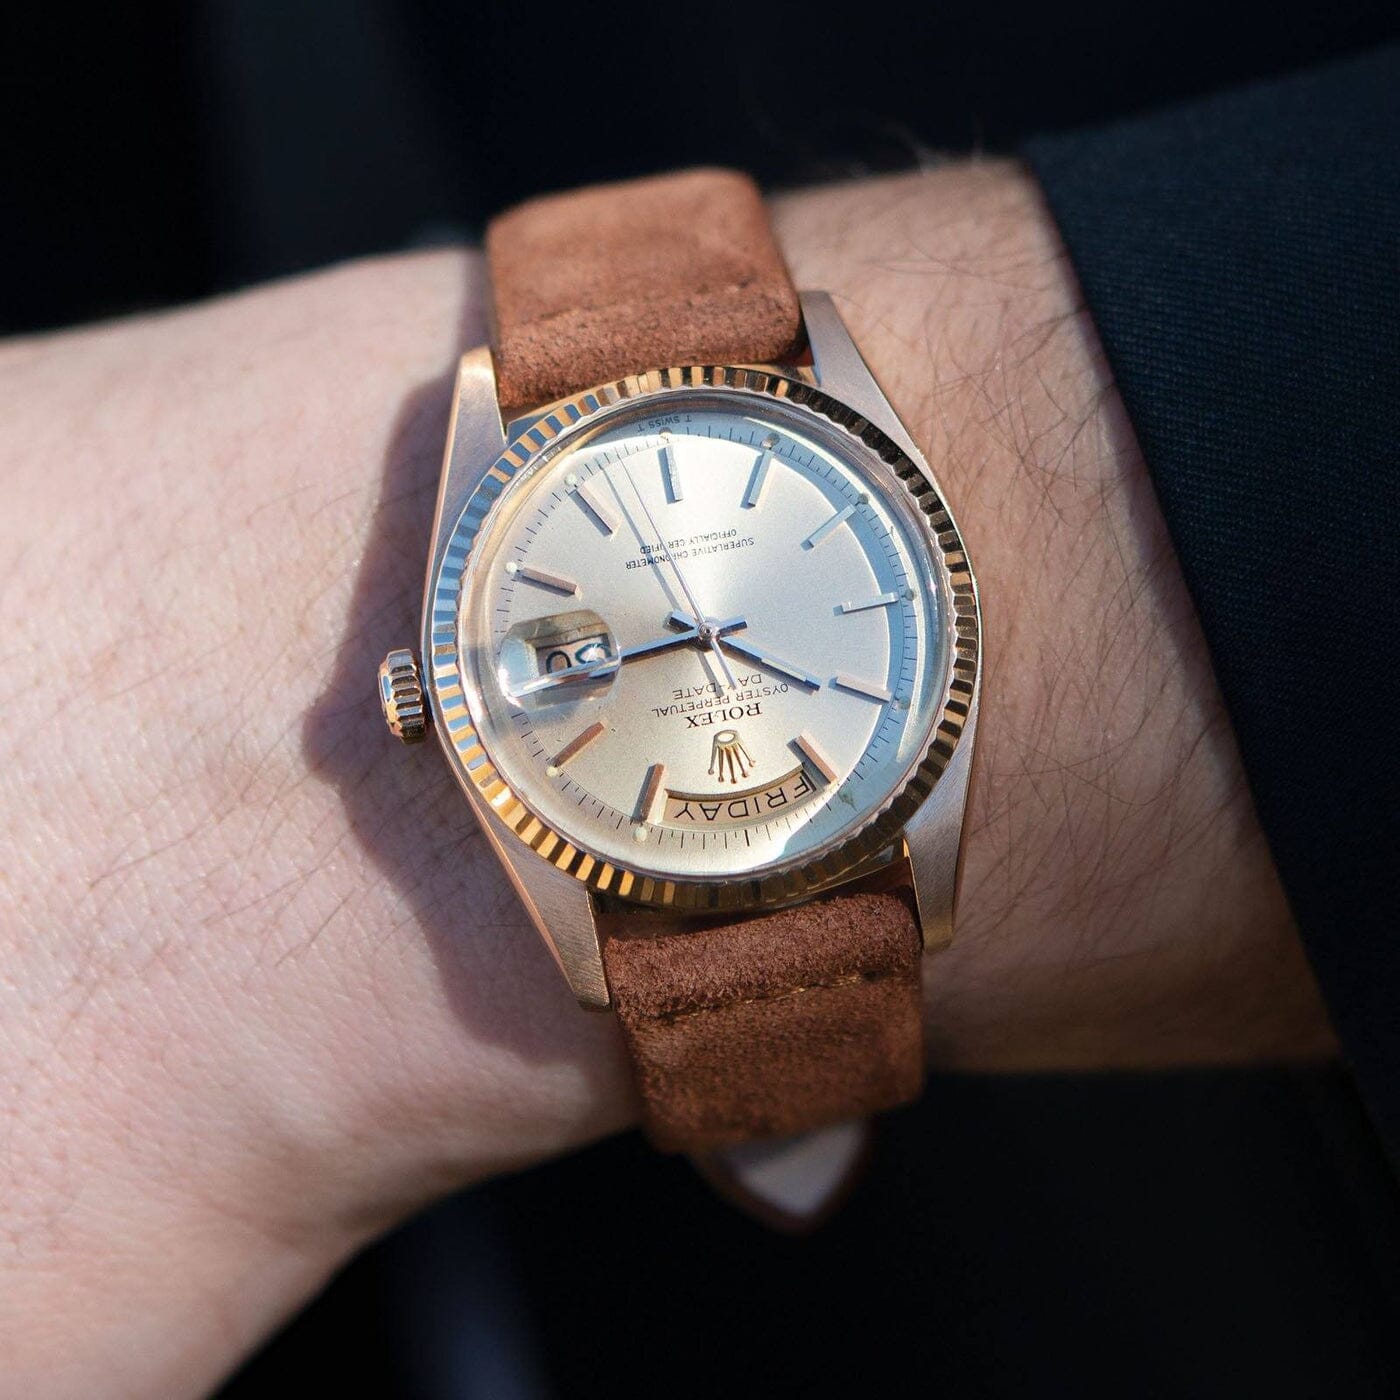 Cognac Brown Silky Suede Leather Watch Strap